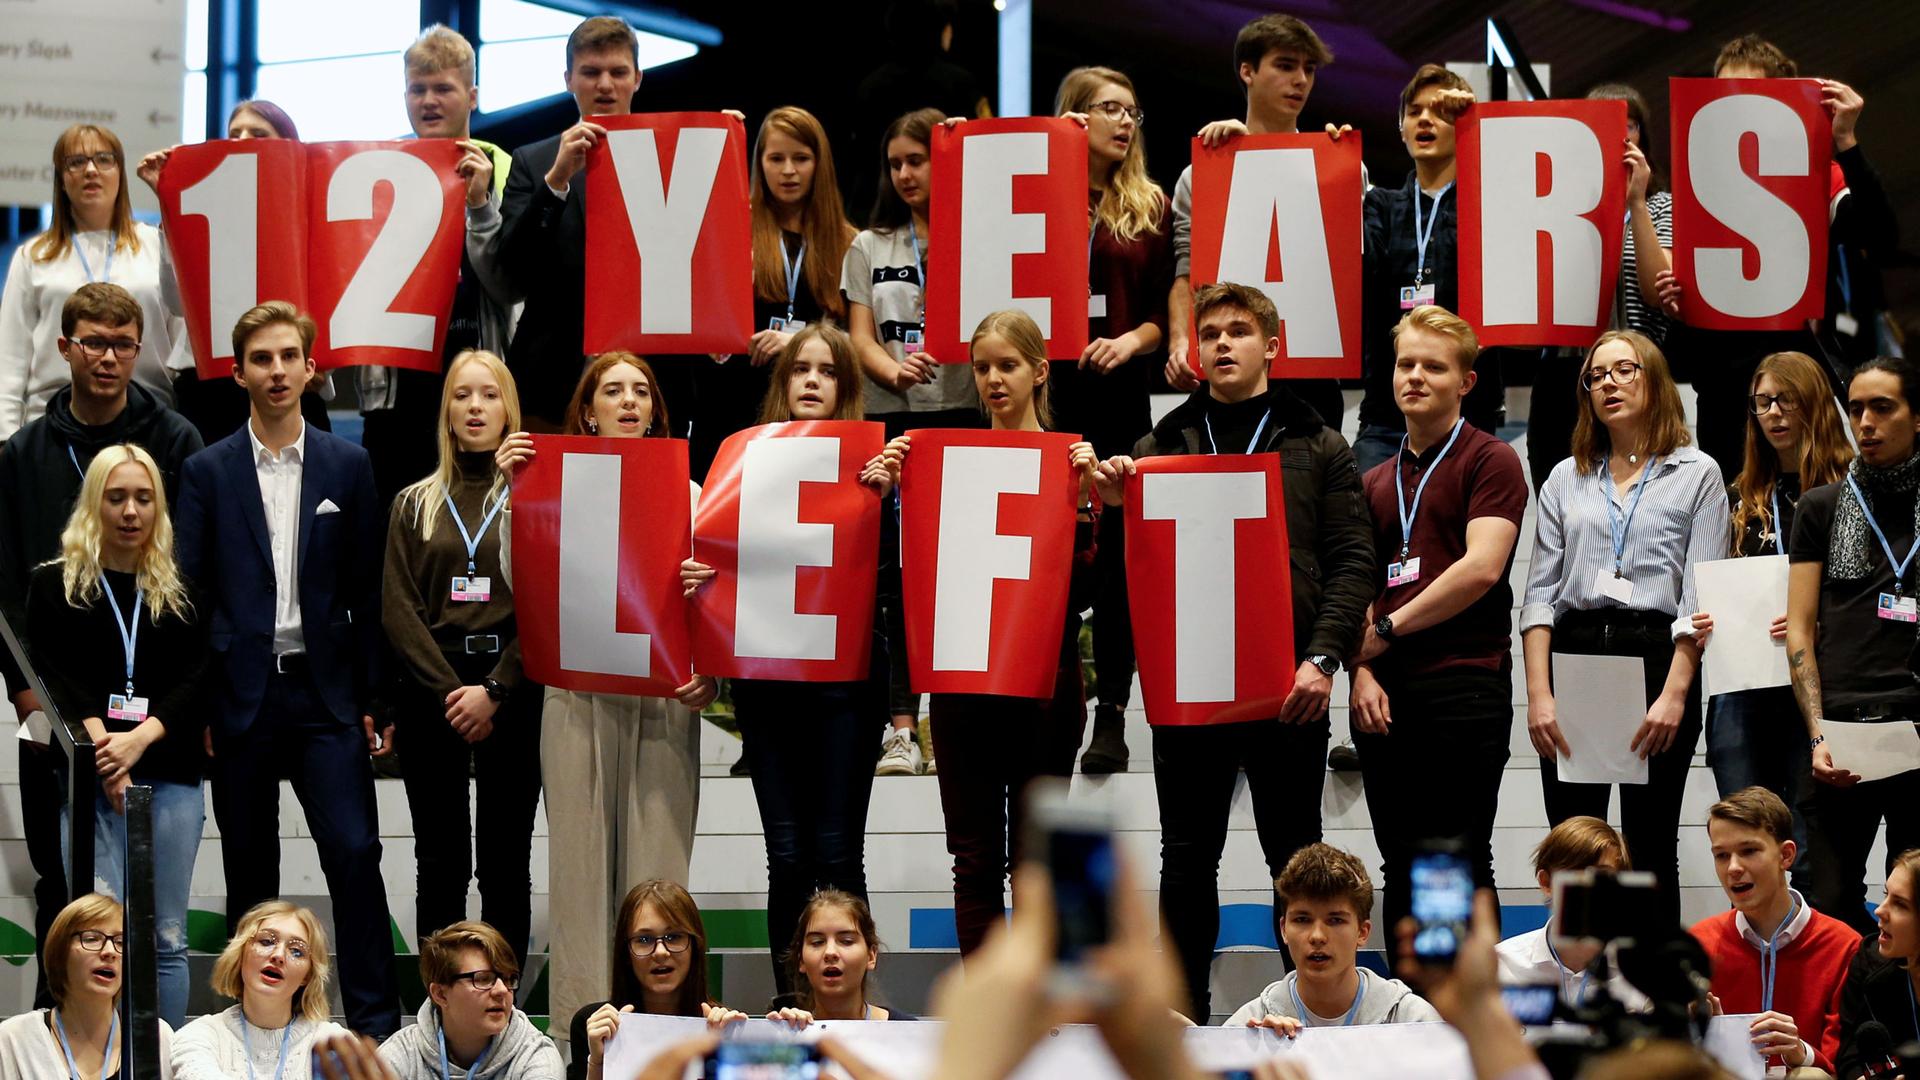 A group of school children hold signs that read "12 years left"